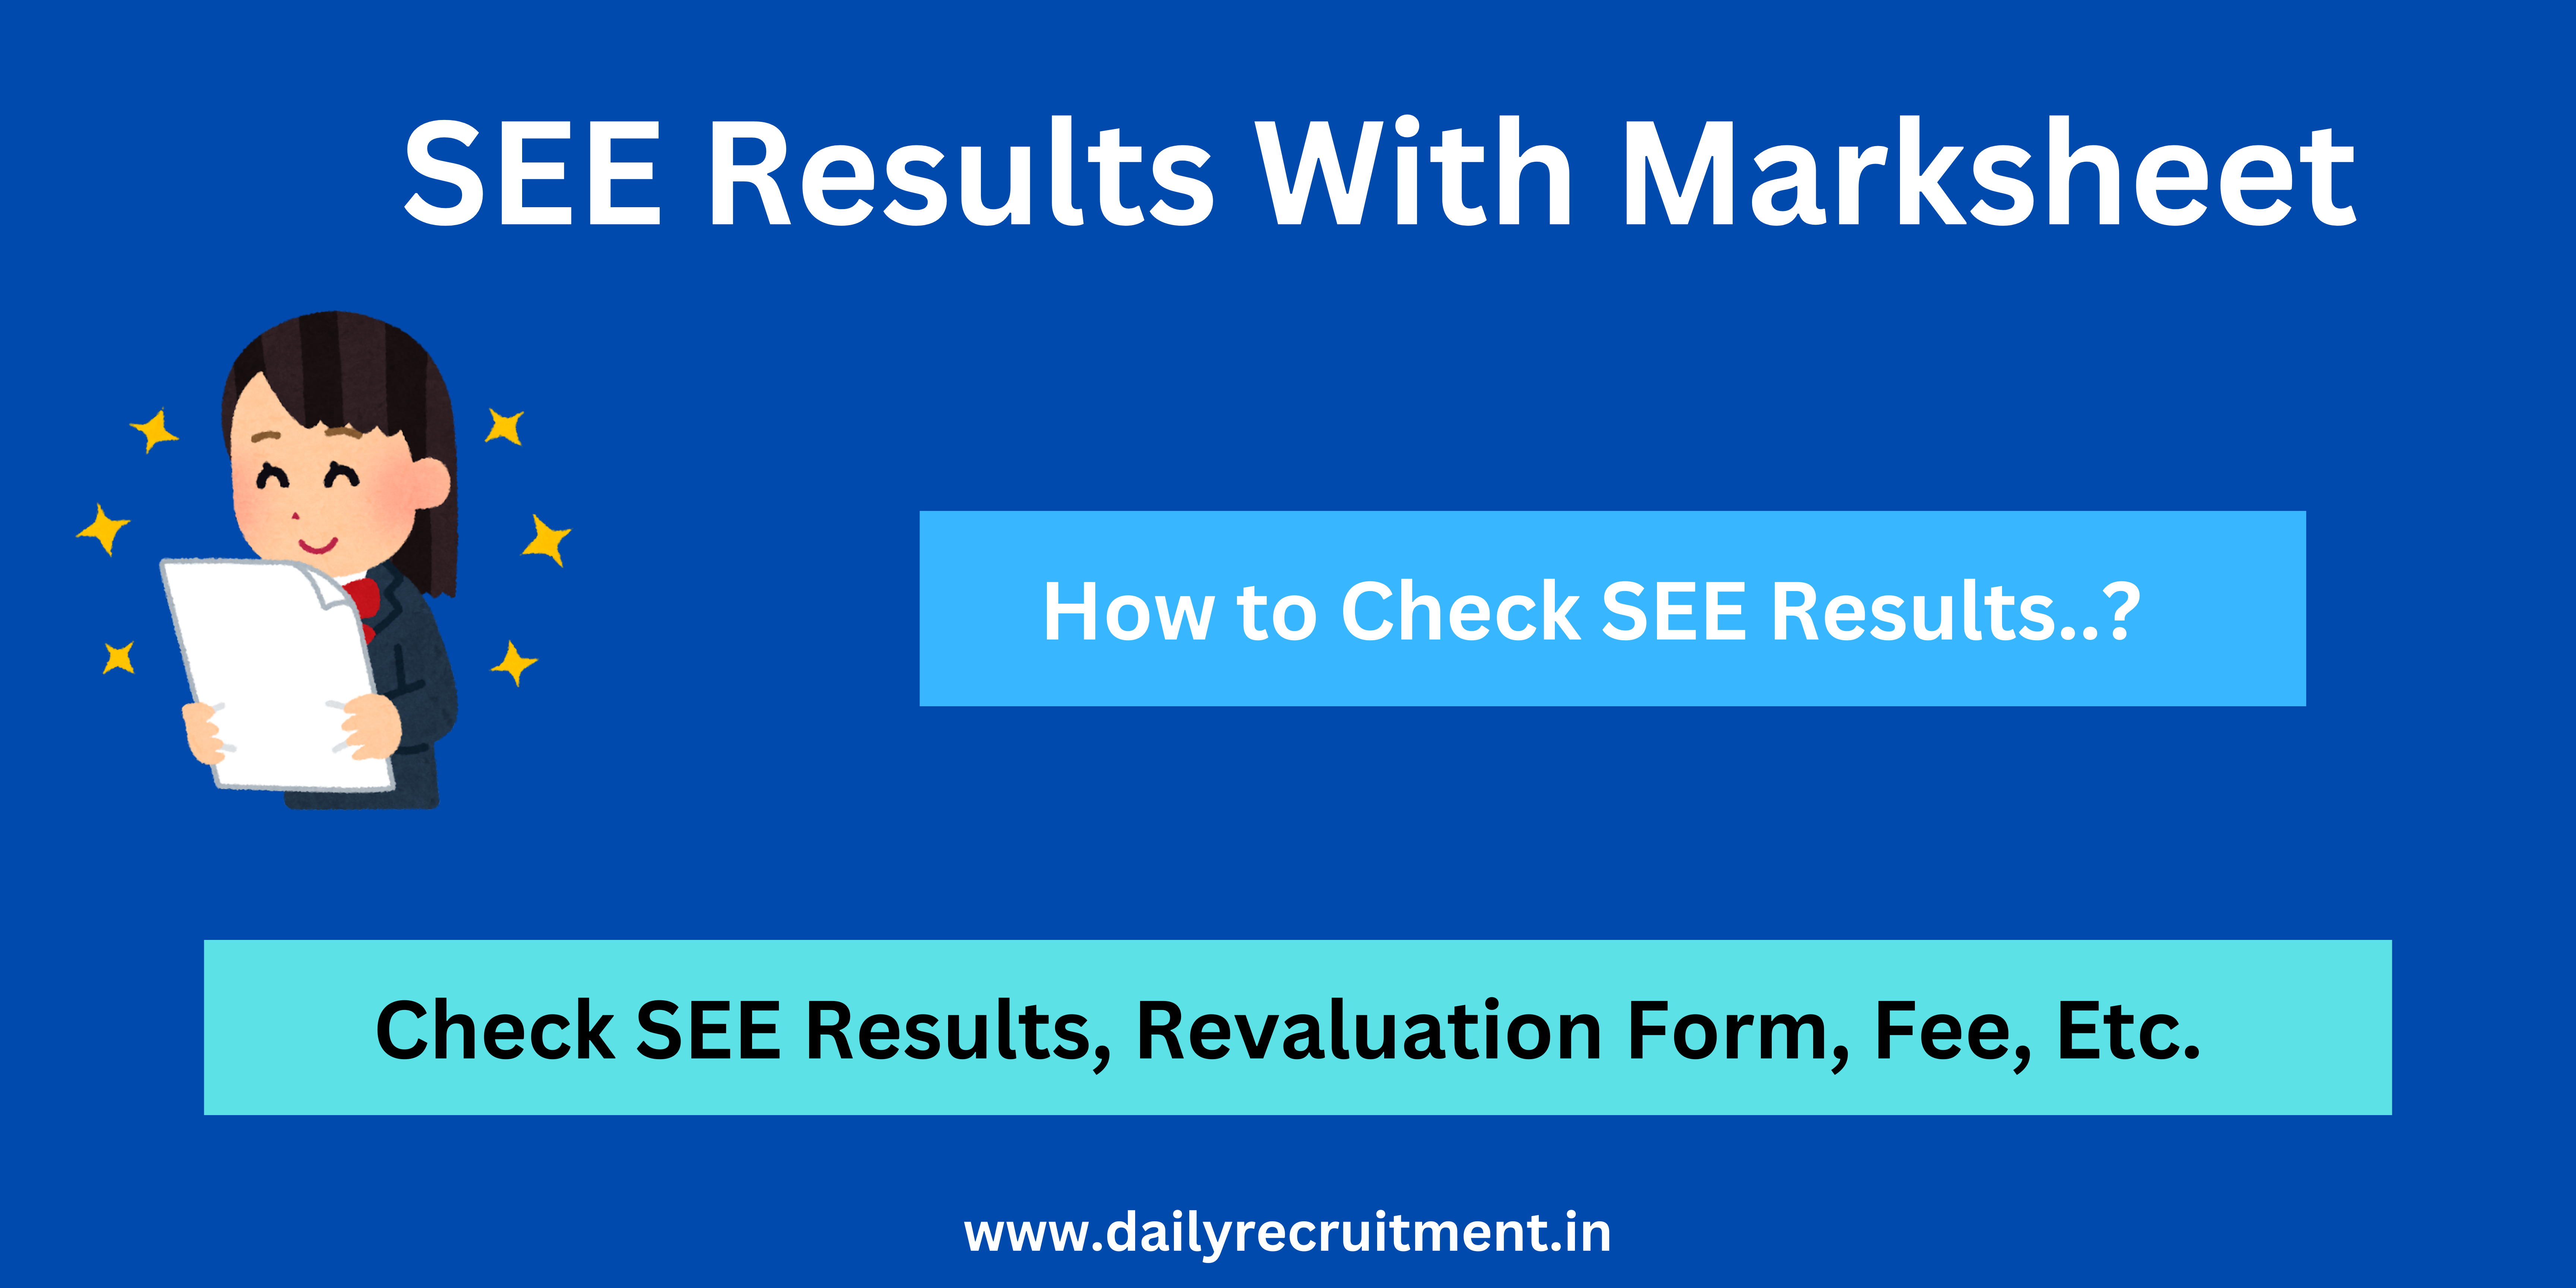 SEE Results With Marksheet